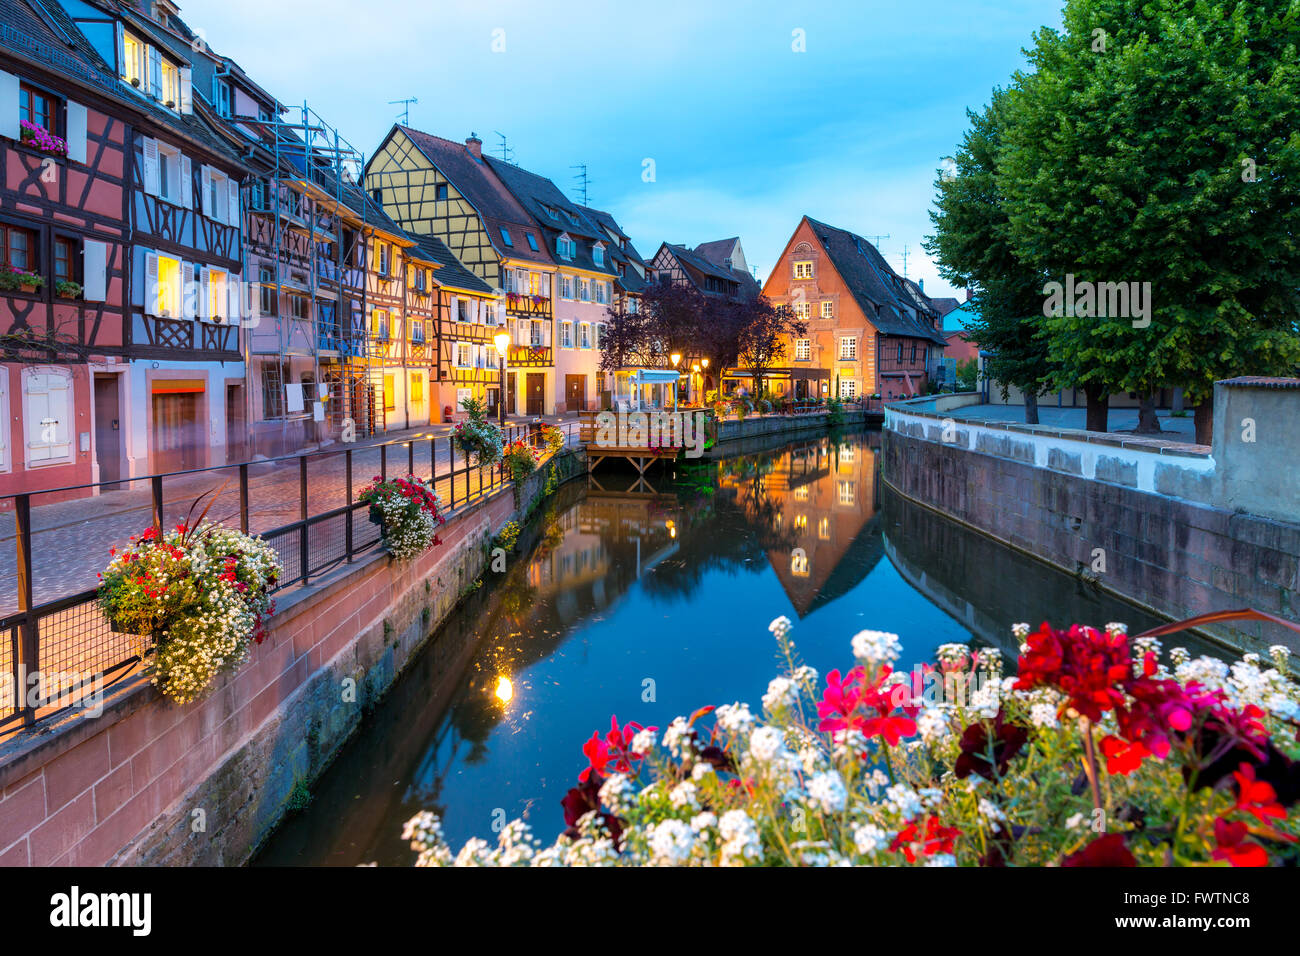 Colmar, Petit Venice, at dusk water canal and traditional colorful houses. Alsace, France. Stock Photo